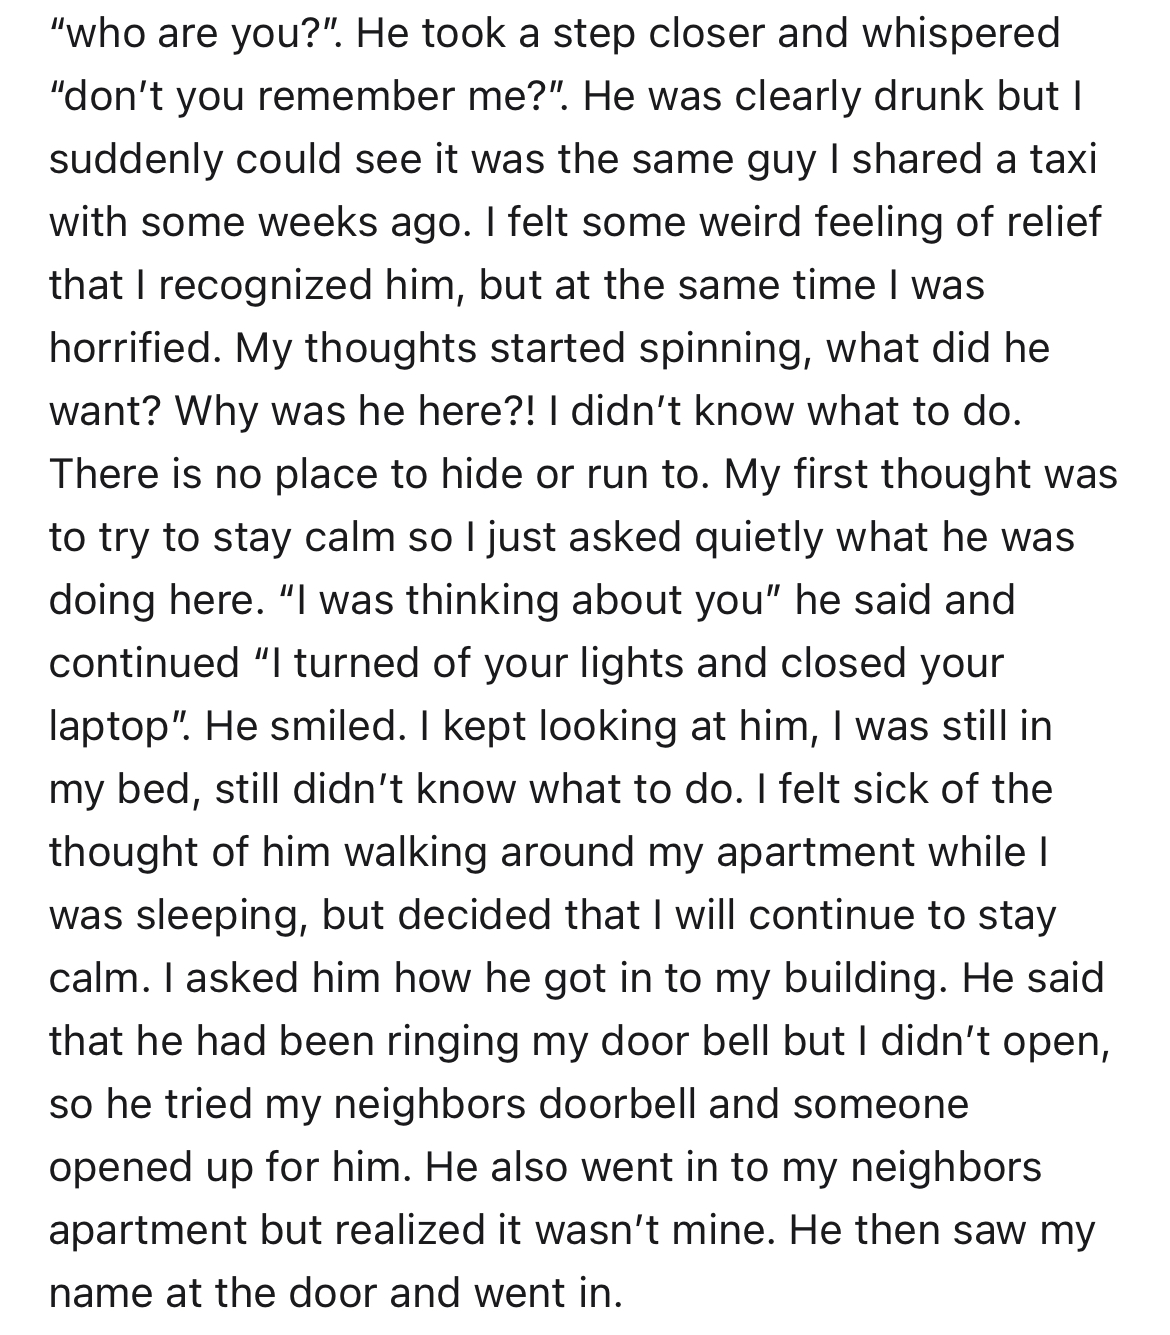 man enters woman's unlocked apartment -angle - "who are you?". He took a step closer and whispered "don't you remember me?". He was clearly drunk but I suddenly could see it was the same guy I d a taxi with some weeks ago. I felt some weird feeling of rel